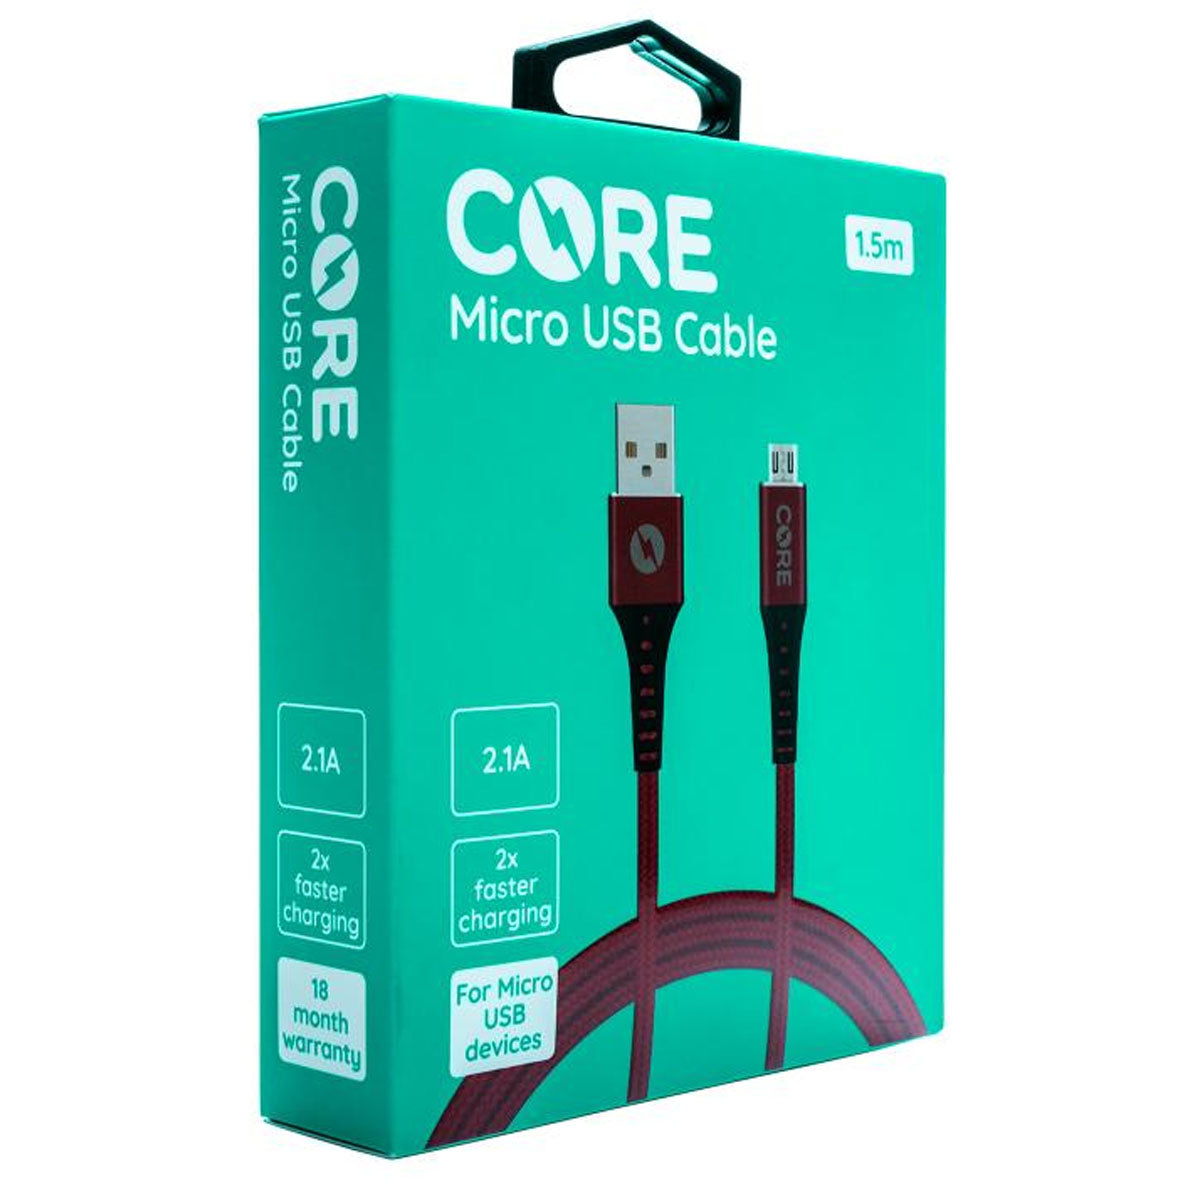 Core - 1.5M Braided Micro USB Cable 2.1A - Continental Food Store